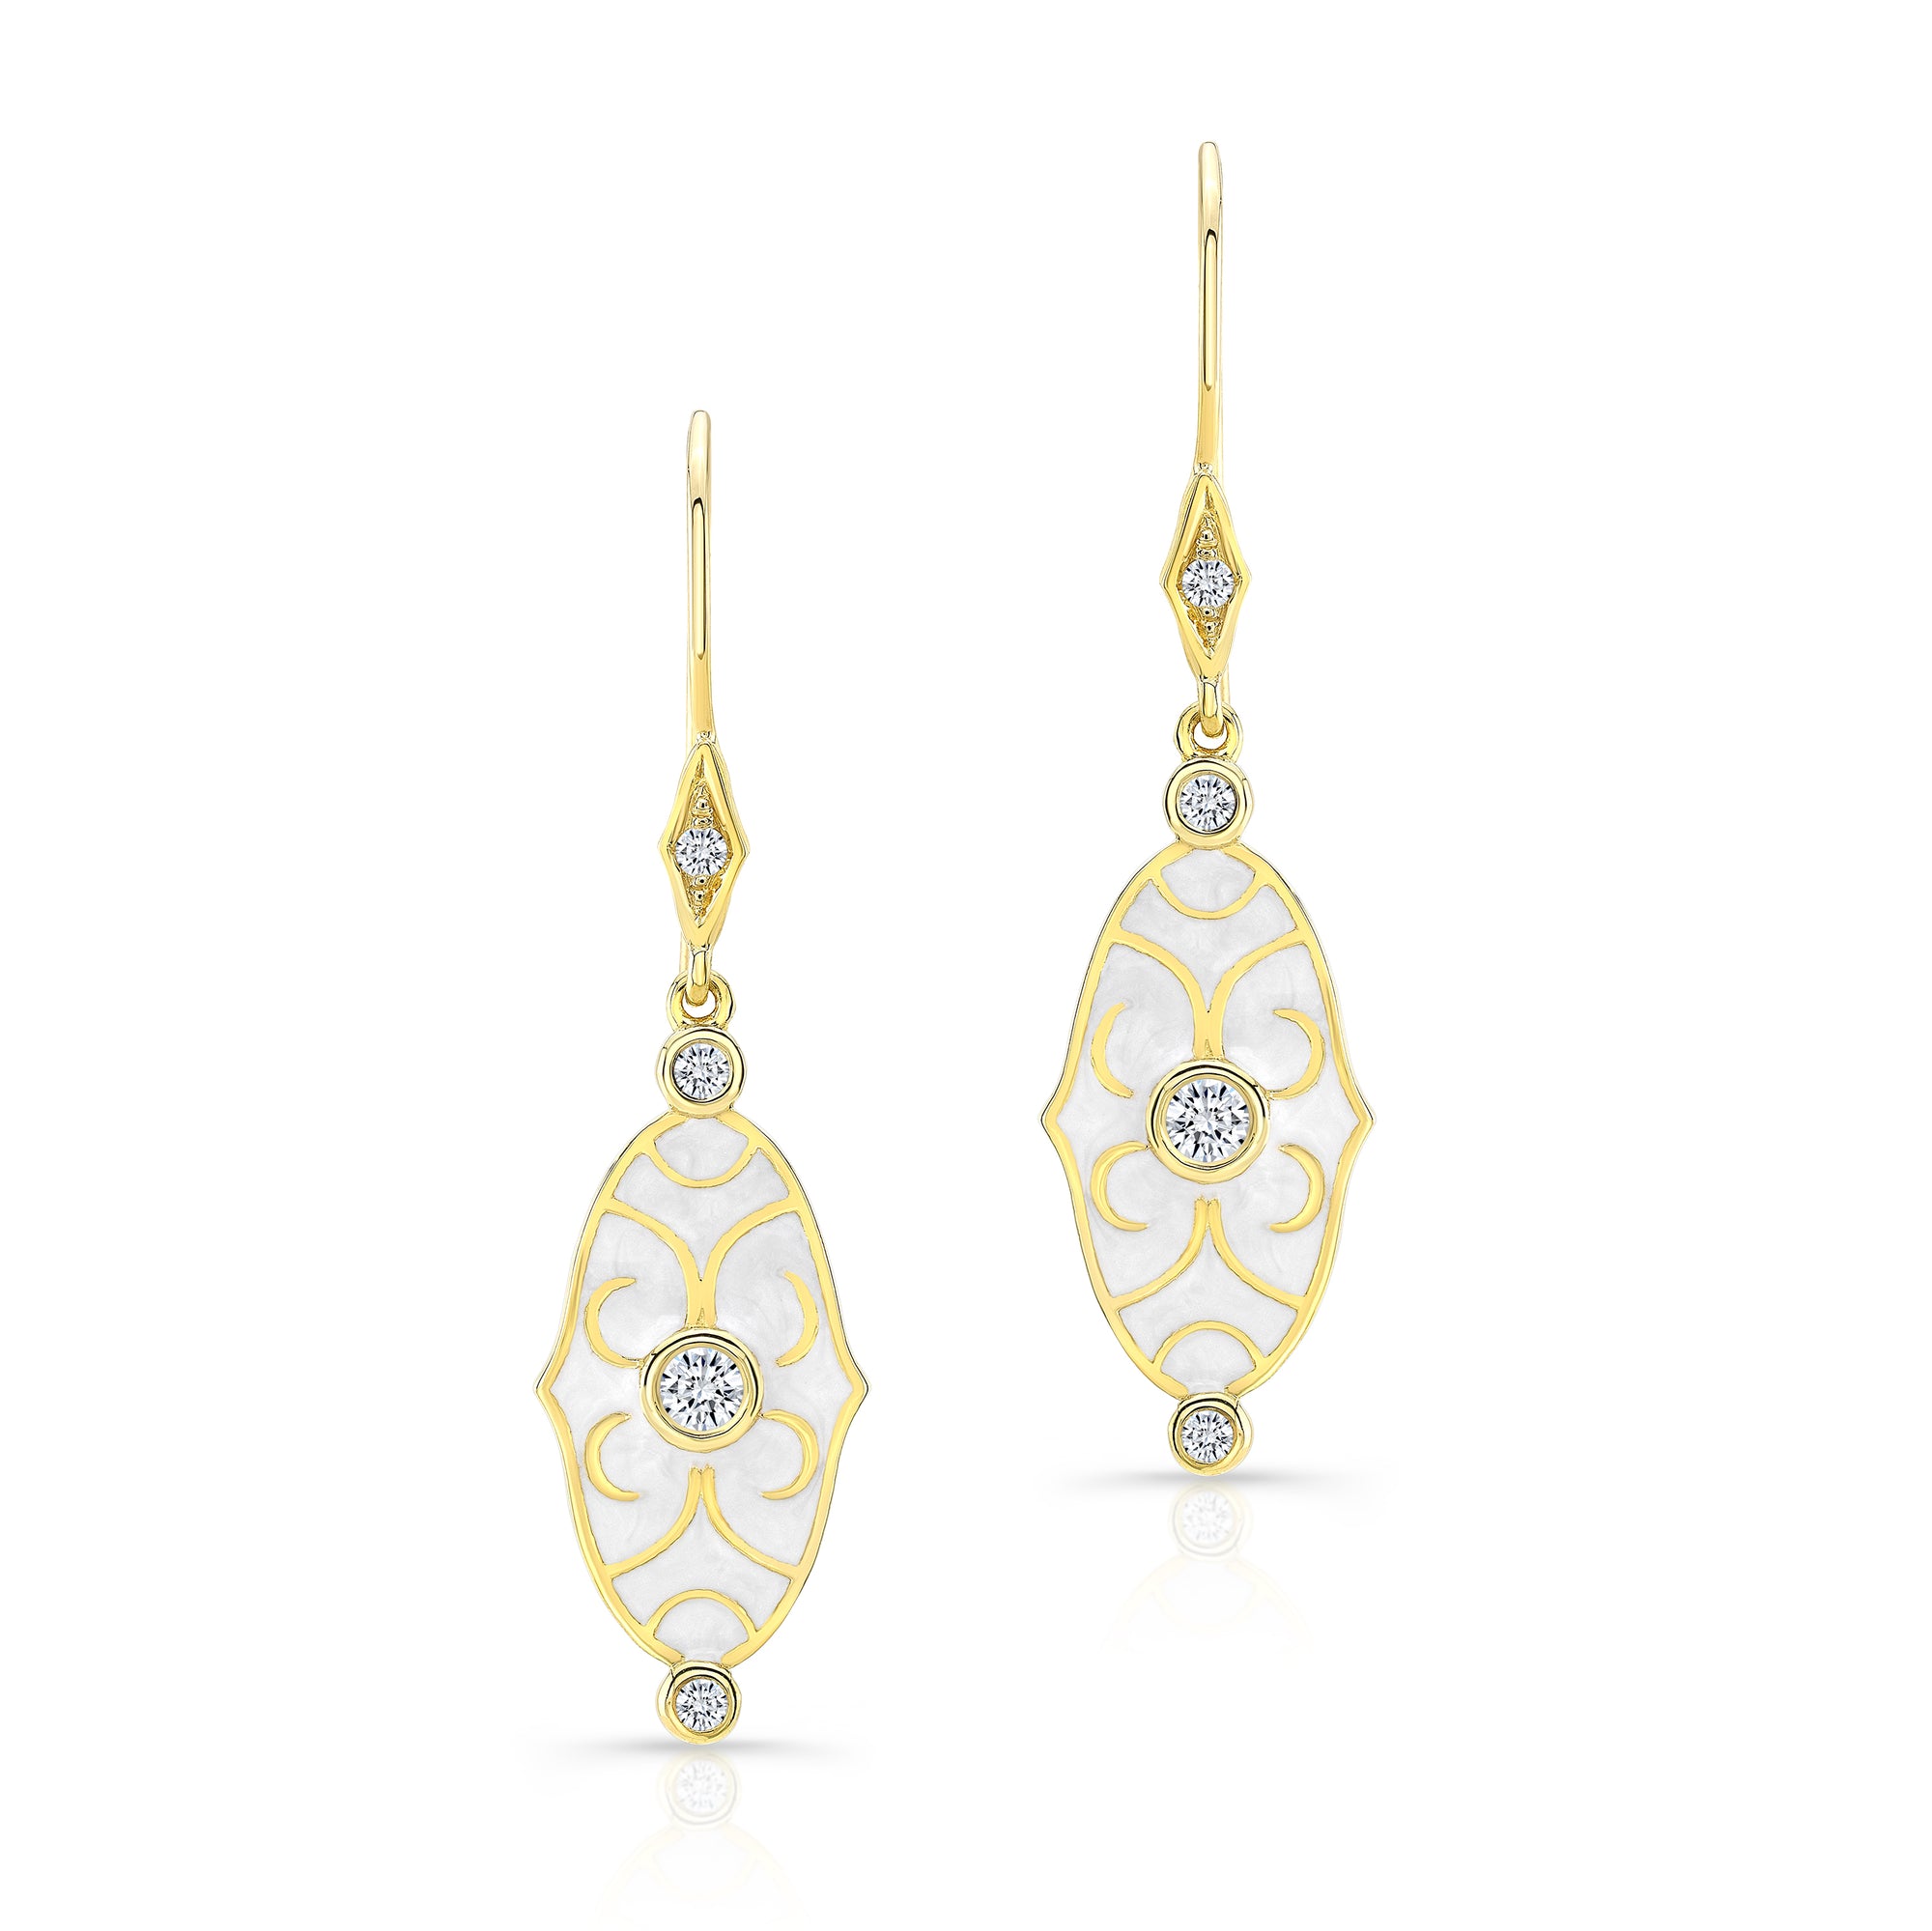 18k Yellow Gold and White Enamel Scroll Earrings by Lord Jewelry - Talisman Collection Fine Jewelers